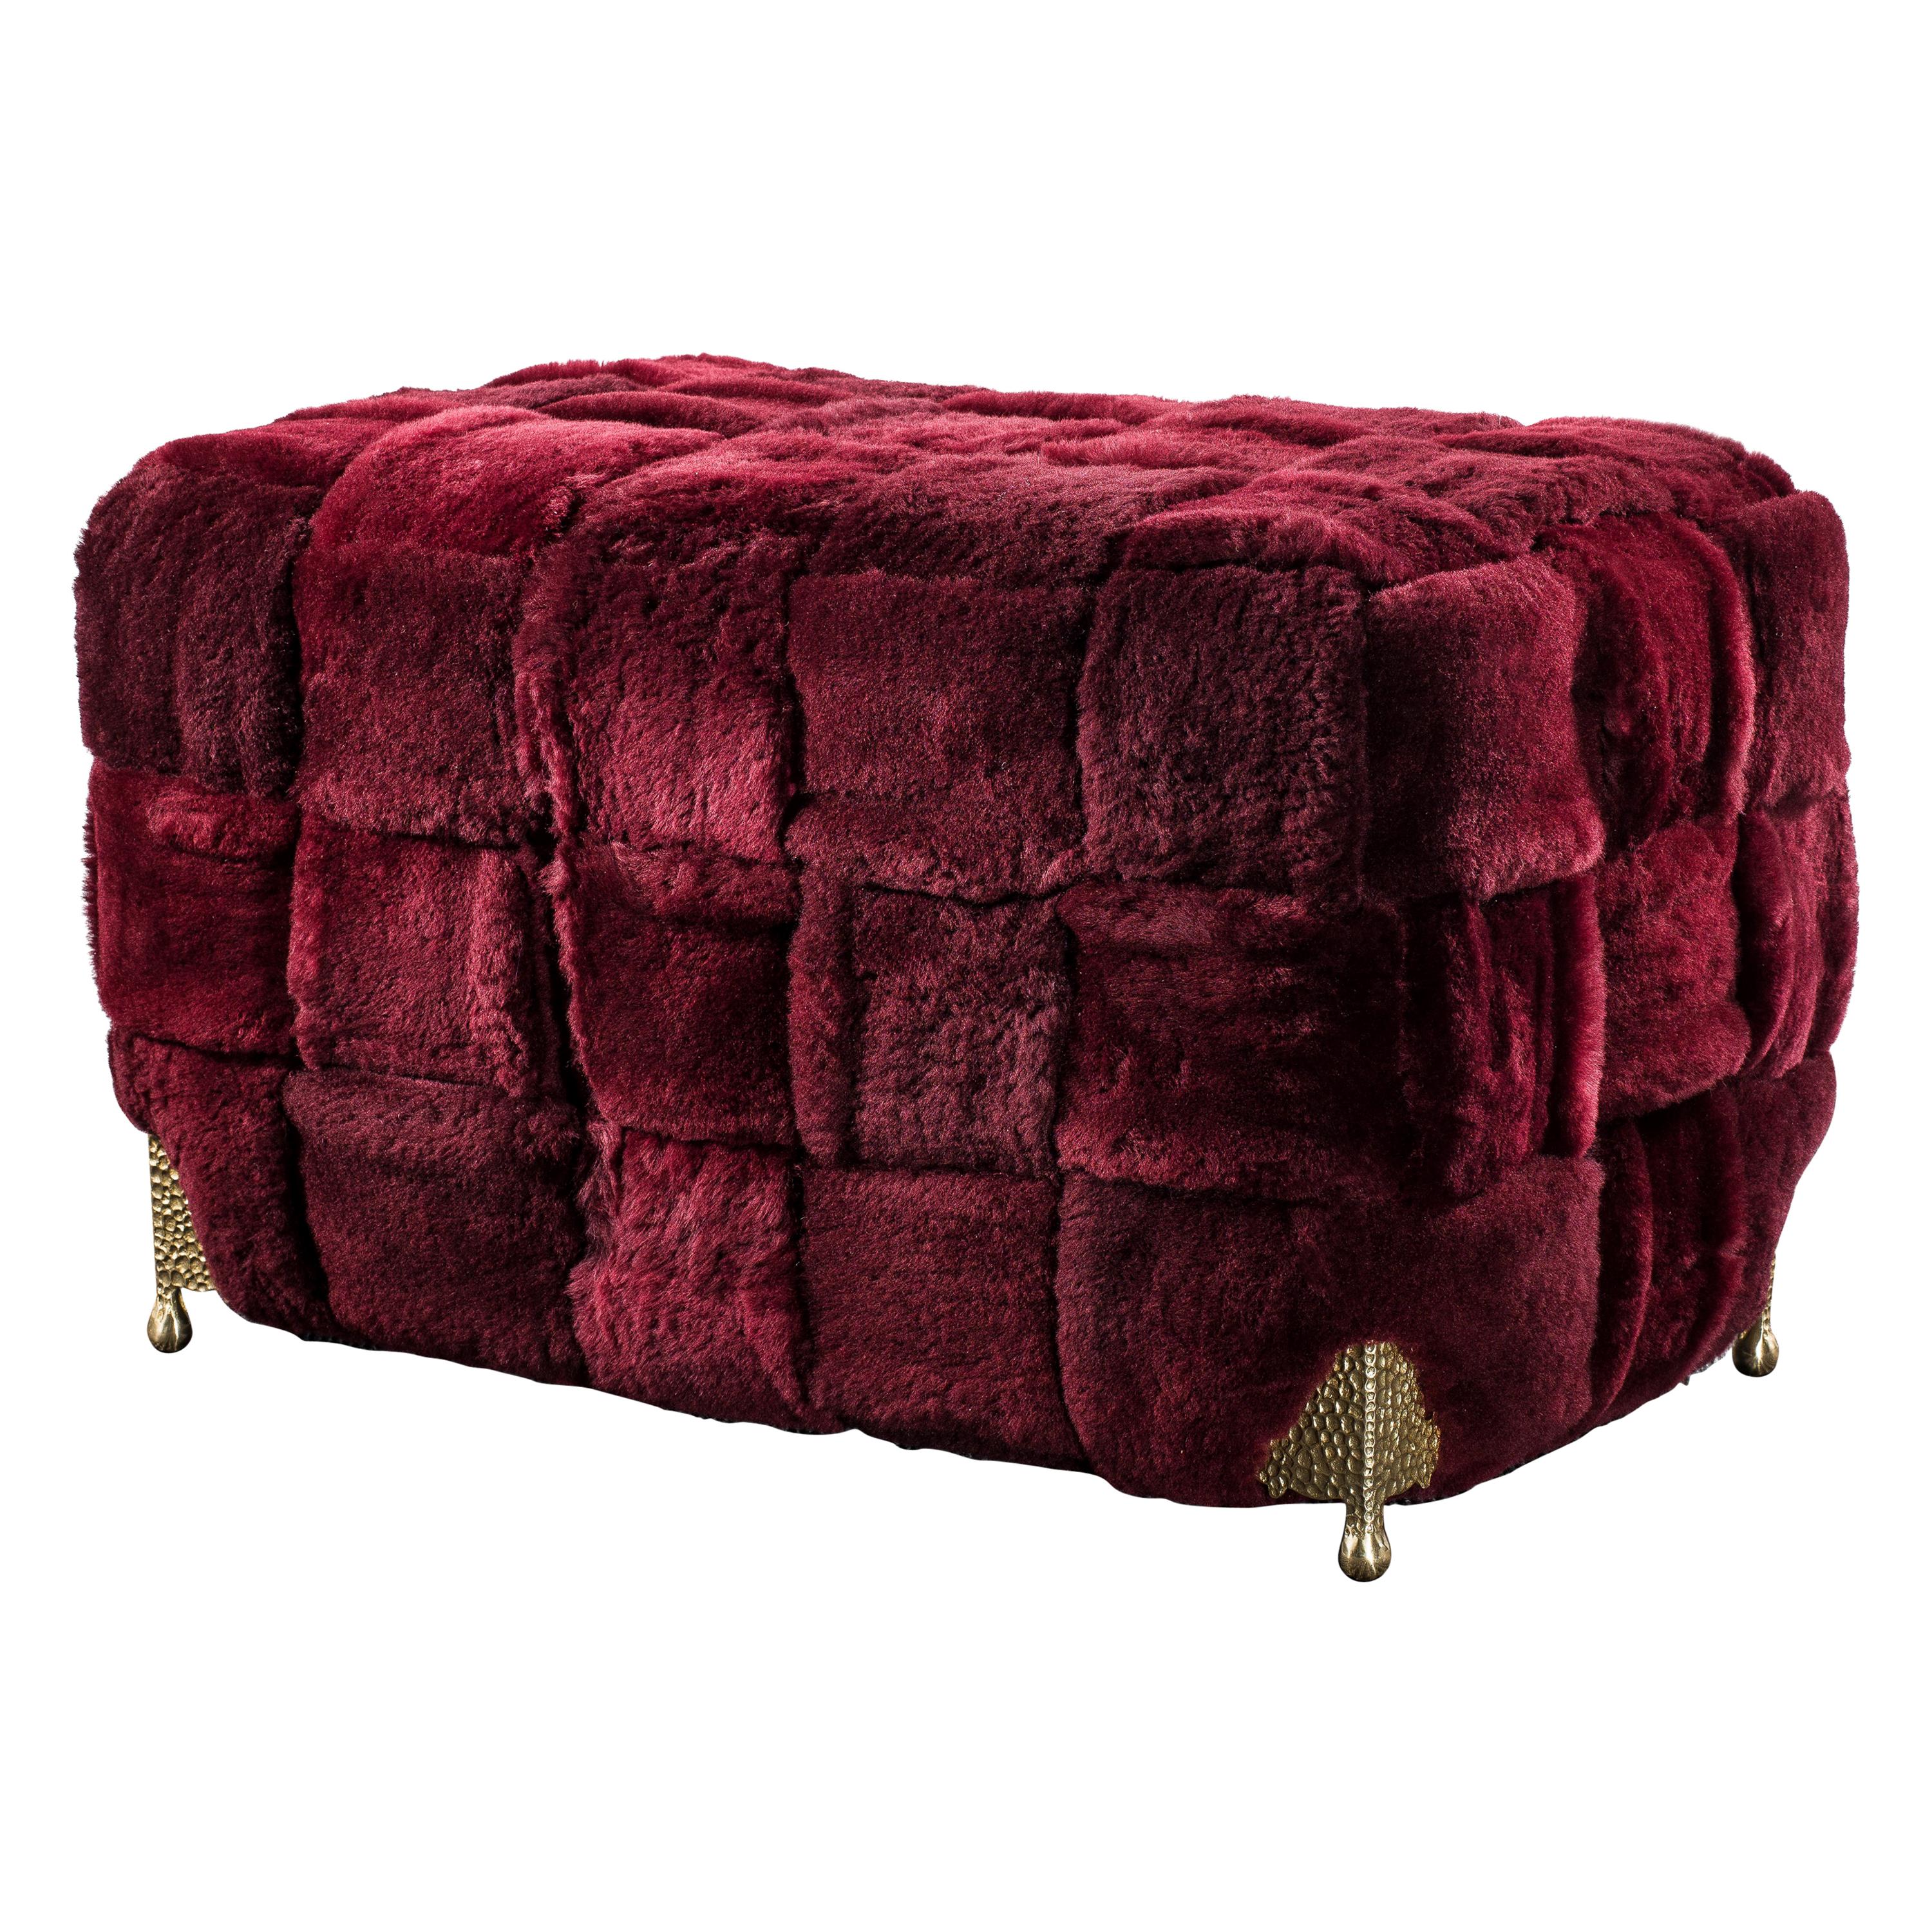 Shearling Ottoman with Brass Legs